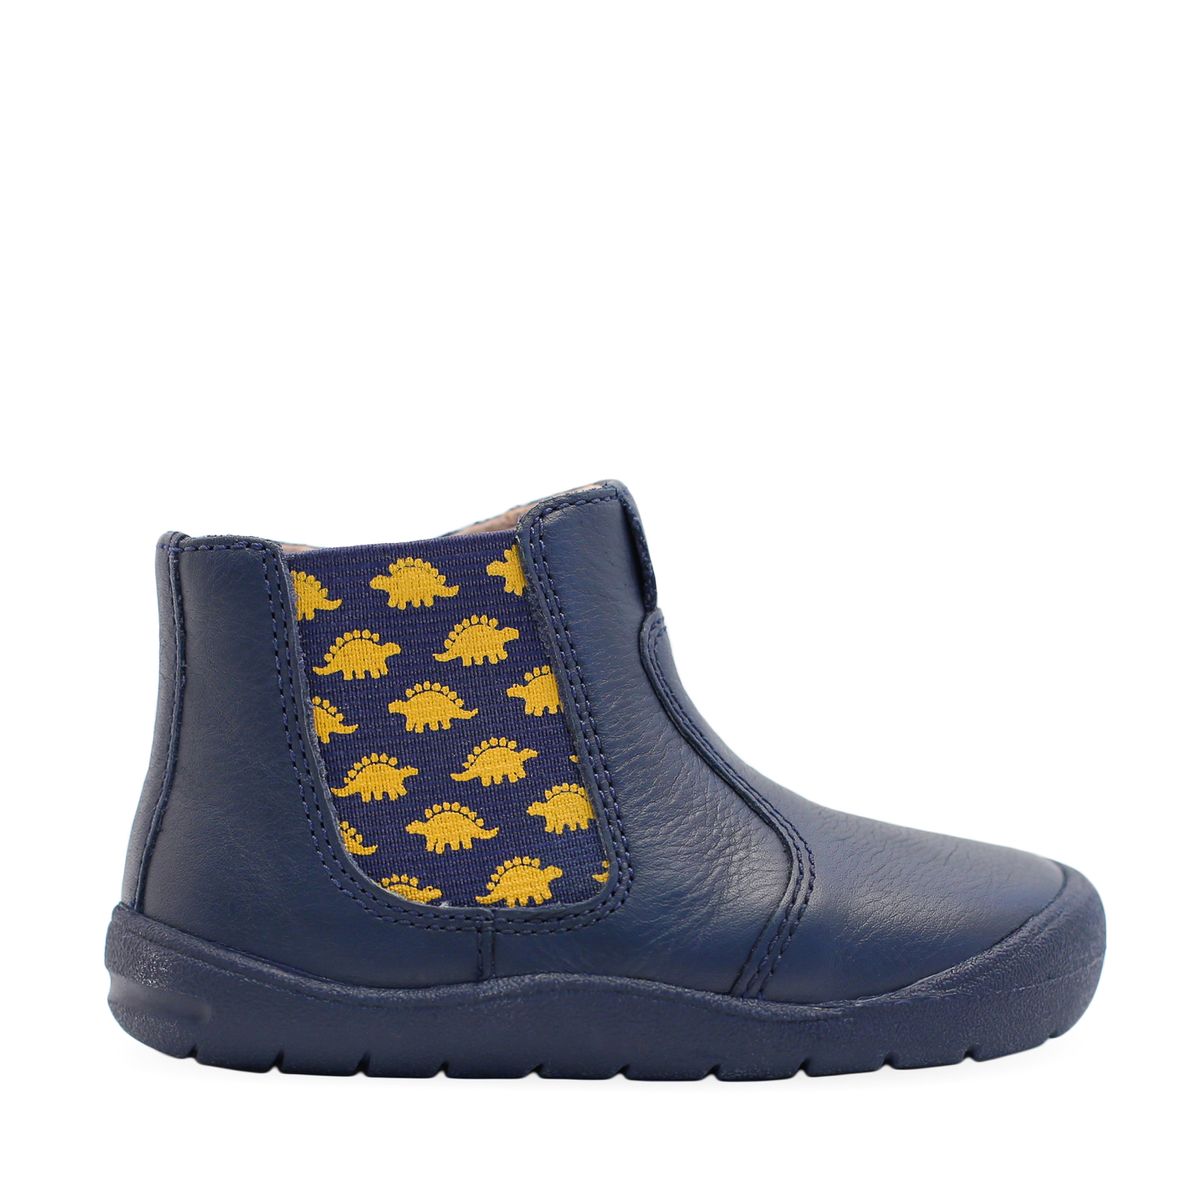 'Friend' in Navy Leather with Dino detail from the exclusive Start-Rite Shoes and JoJo Maman Bébé Collection 